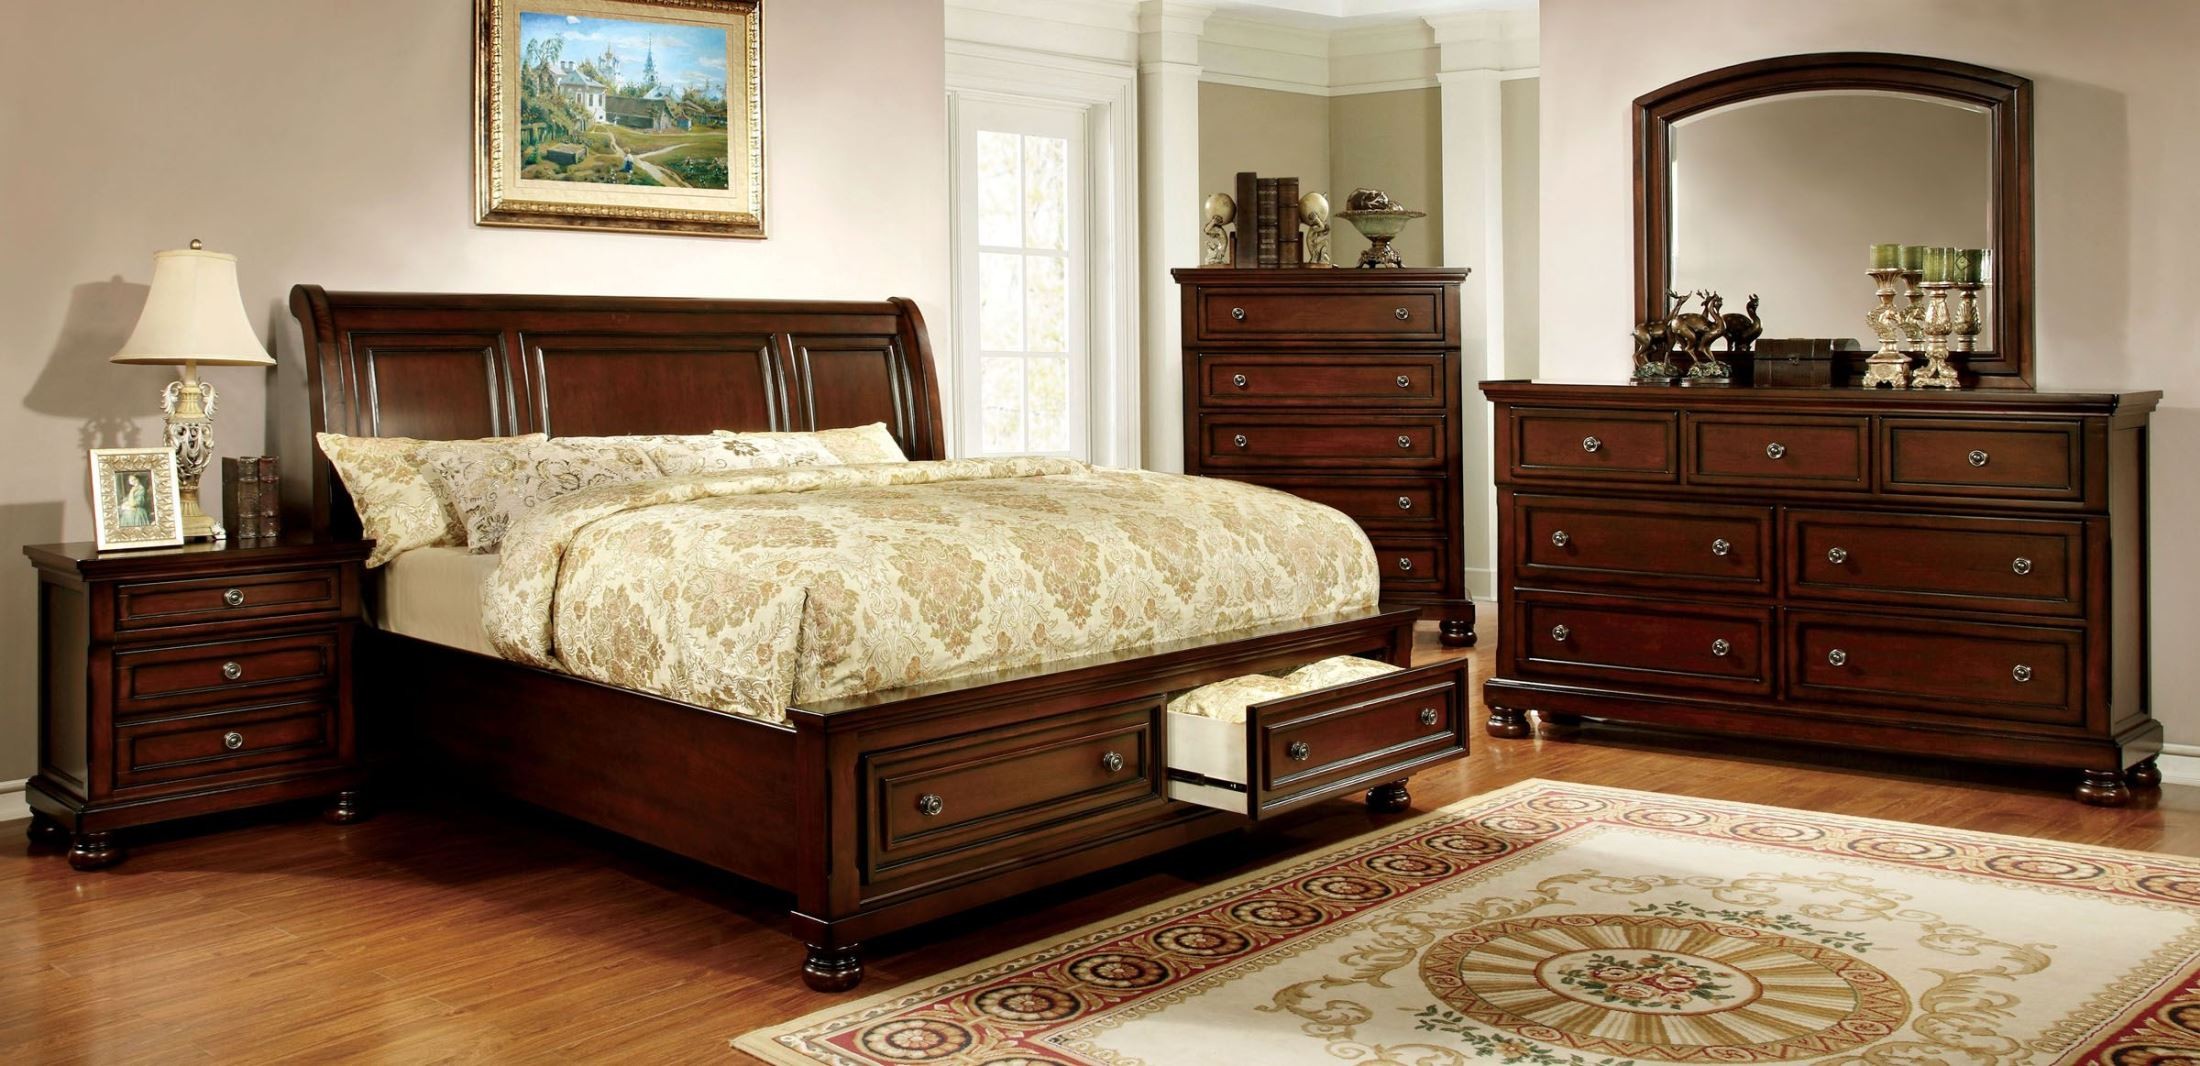 furniture of america tole traditional cherry bedroom set